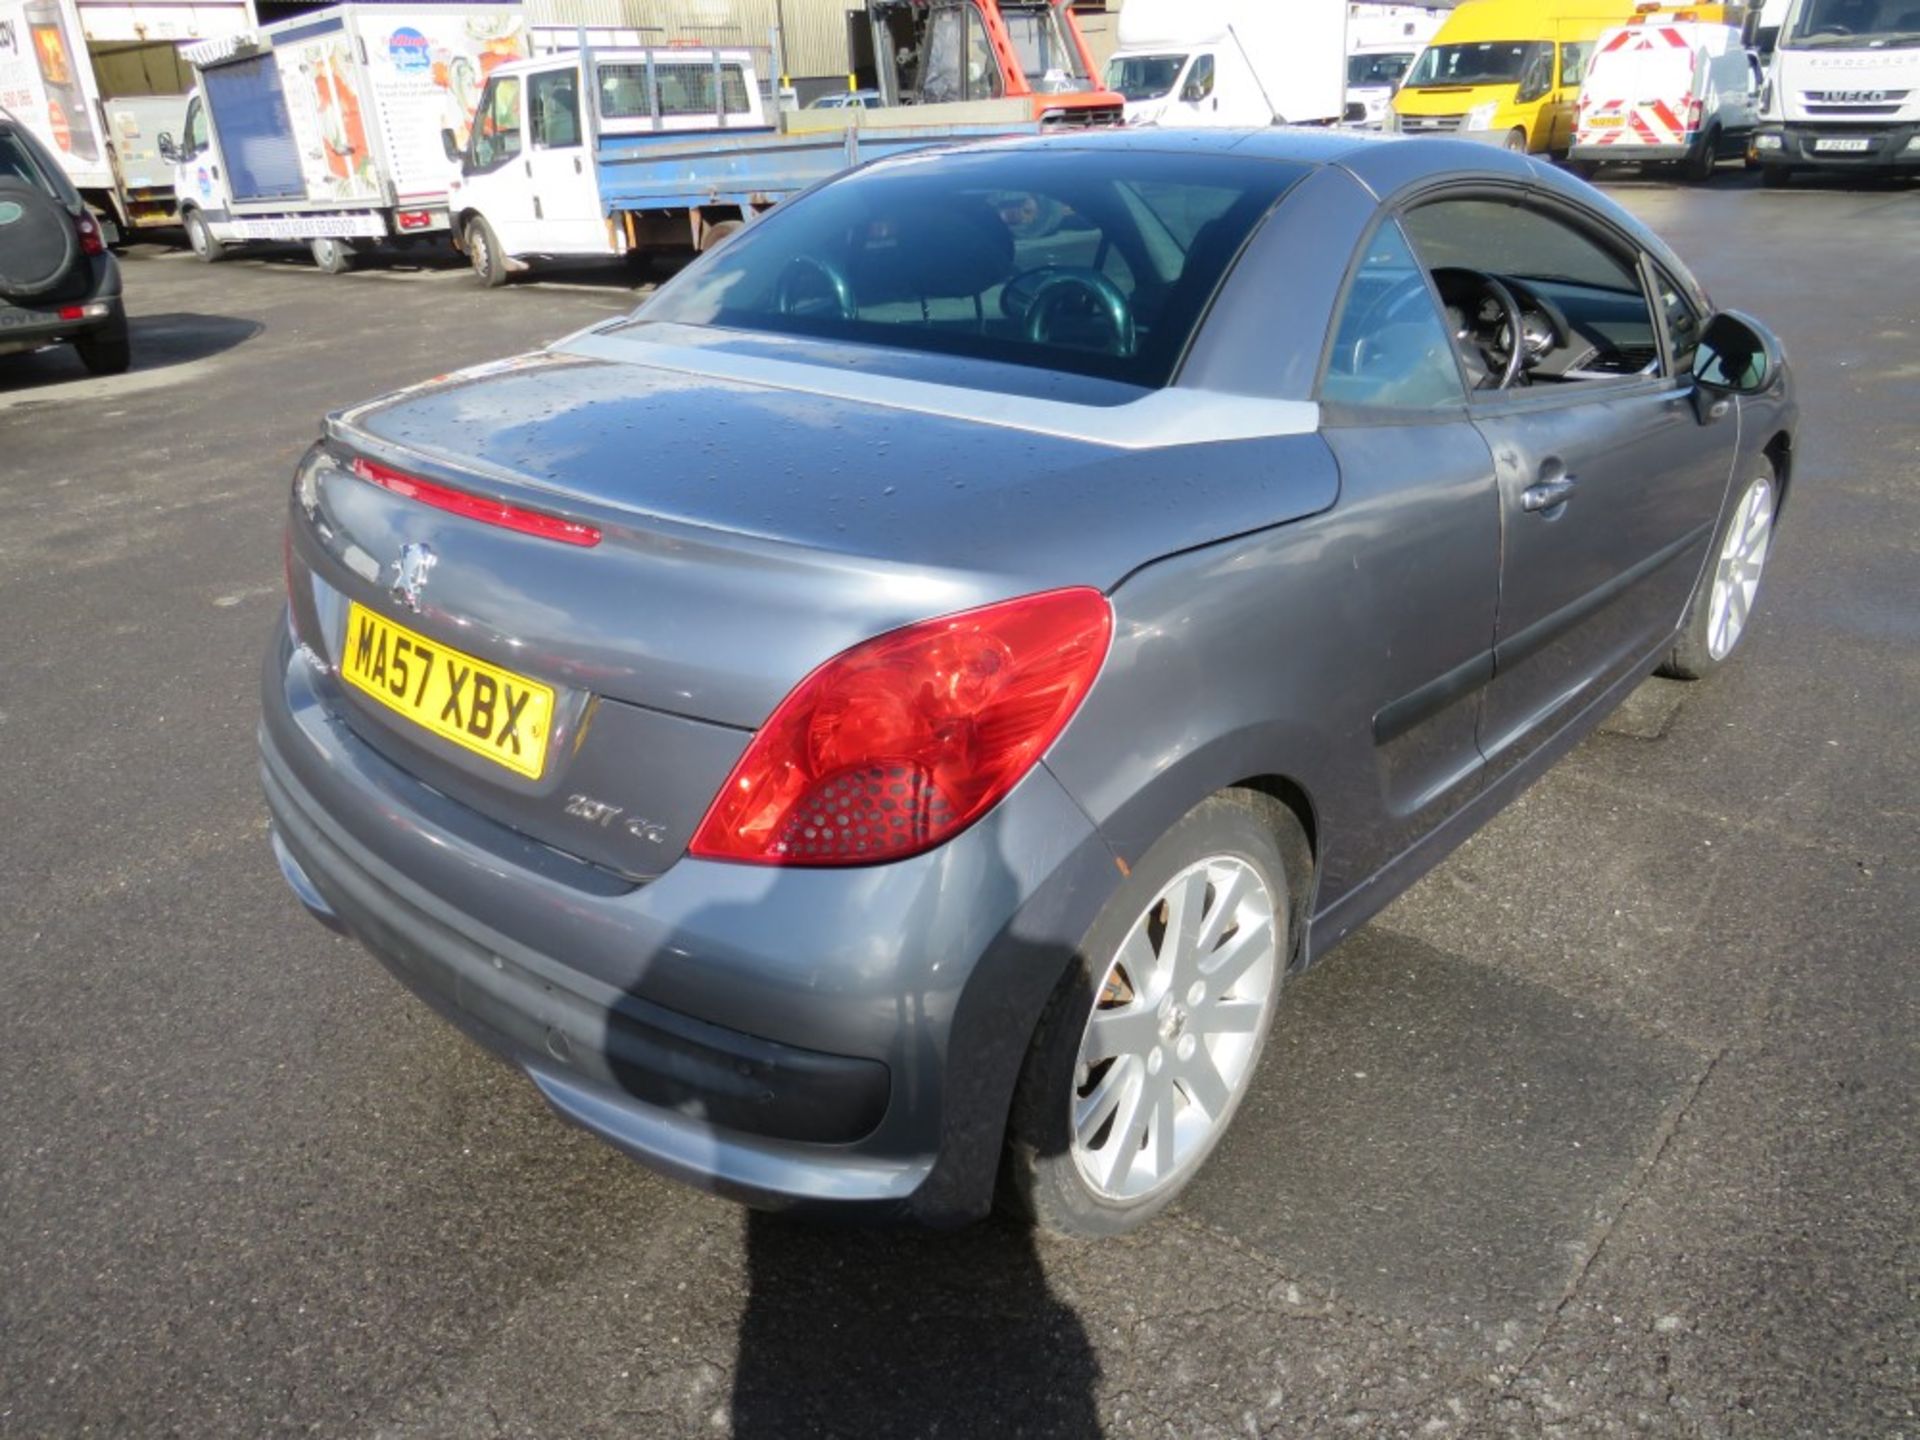 57 reg PEUGEOT 207 GT CC COUPE, 1ST REG 09/07, 113107M NOT WARRANTED, V5 HERE, 5 FORMER KEEPERS [ - Image 4 of 6